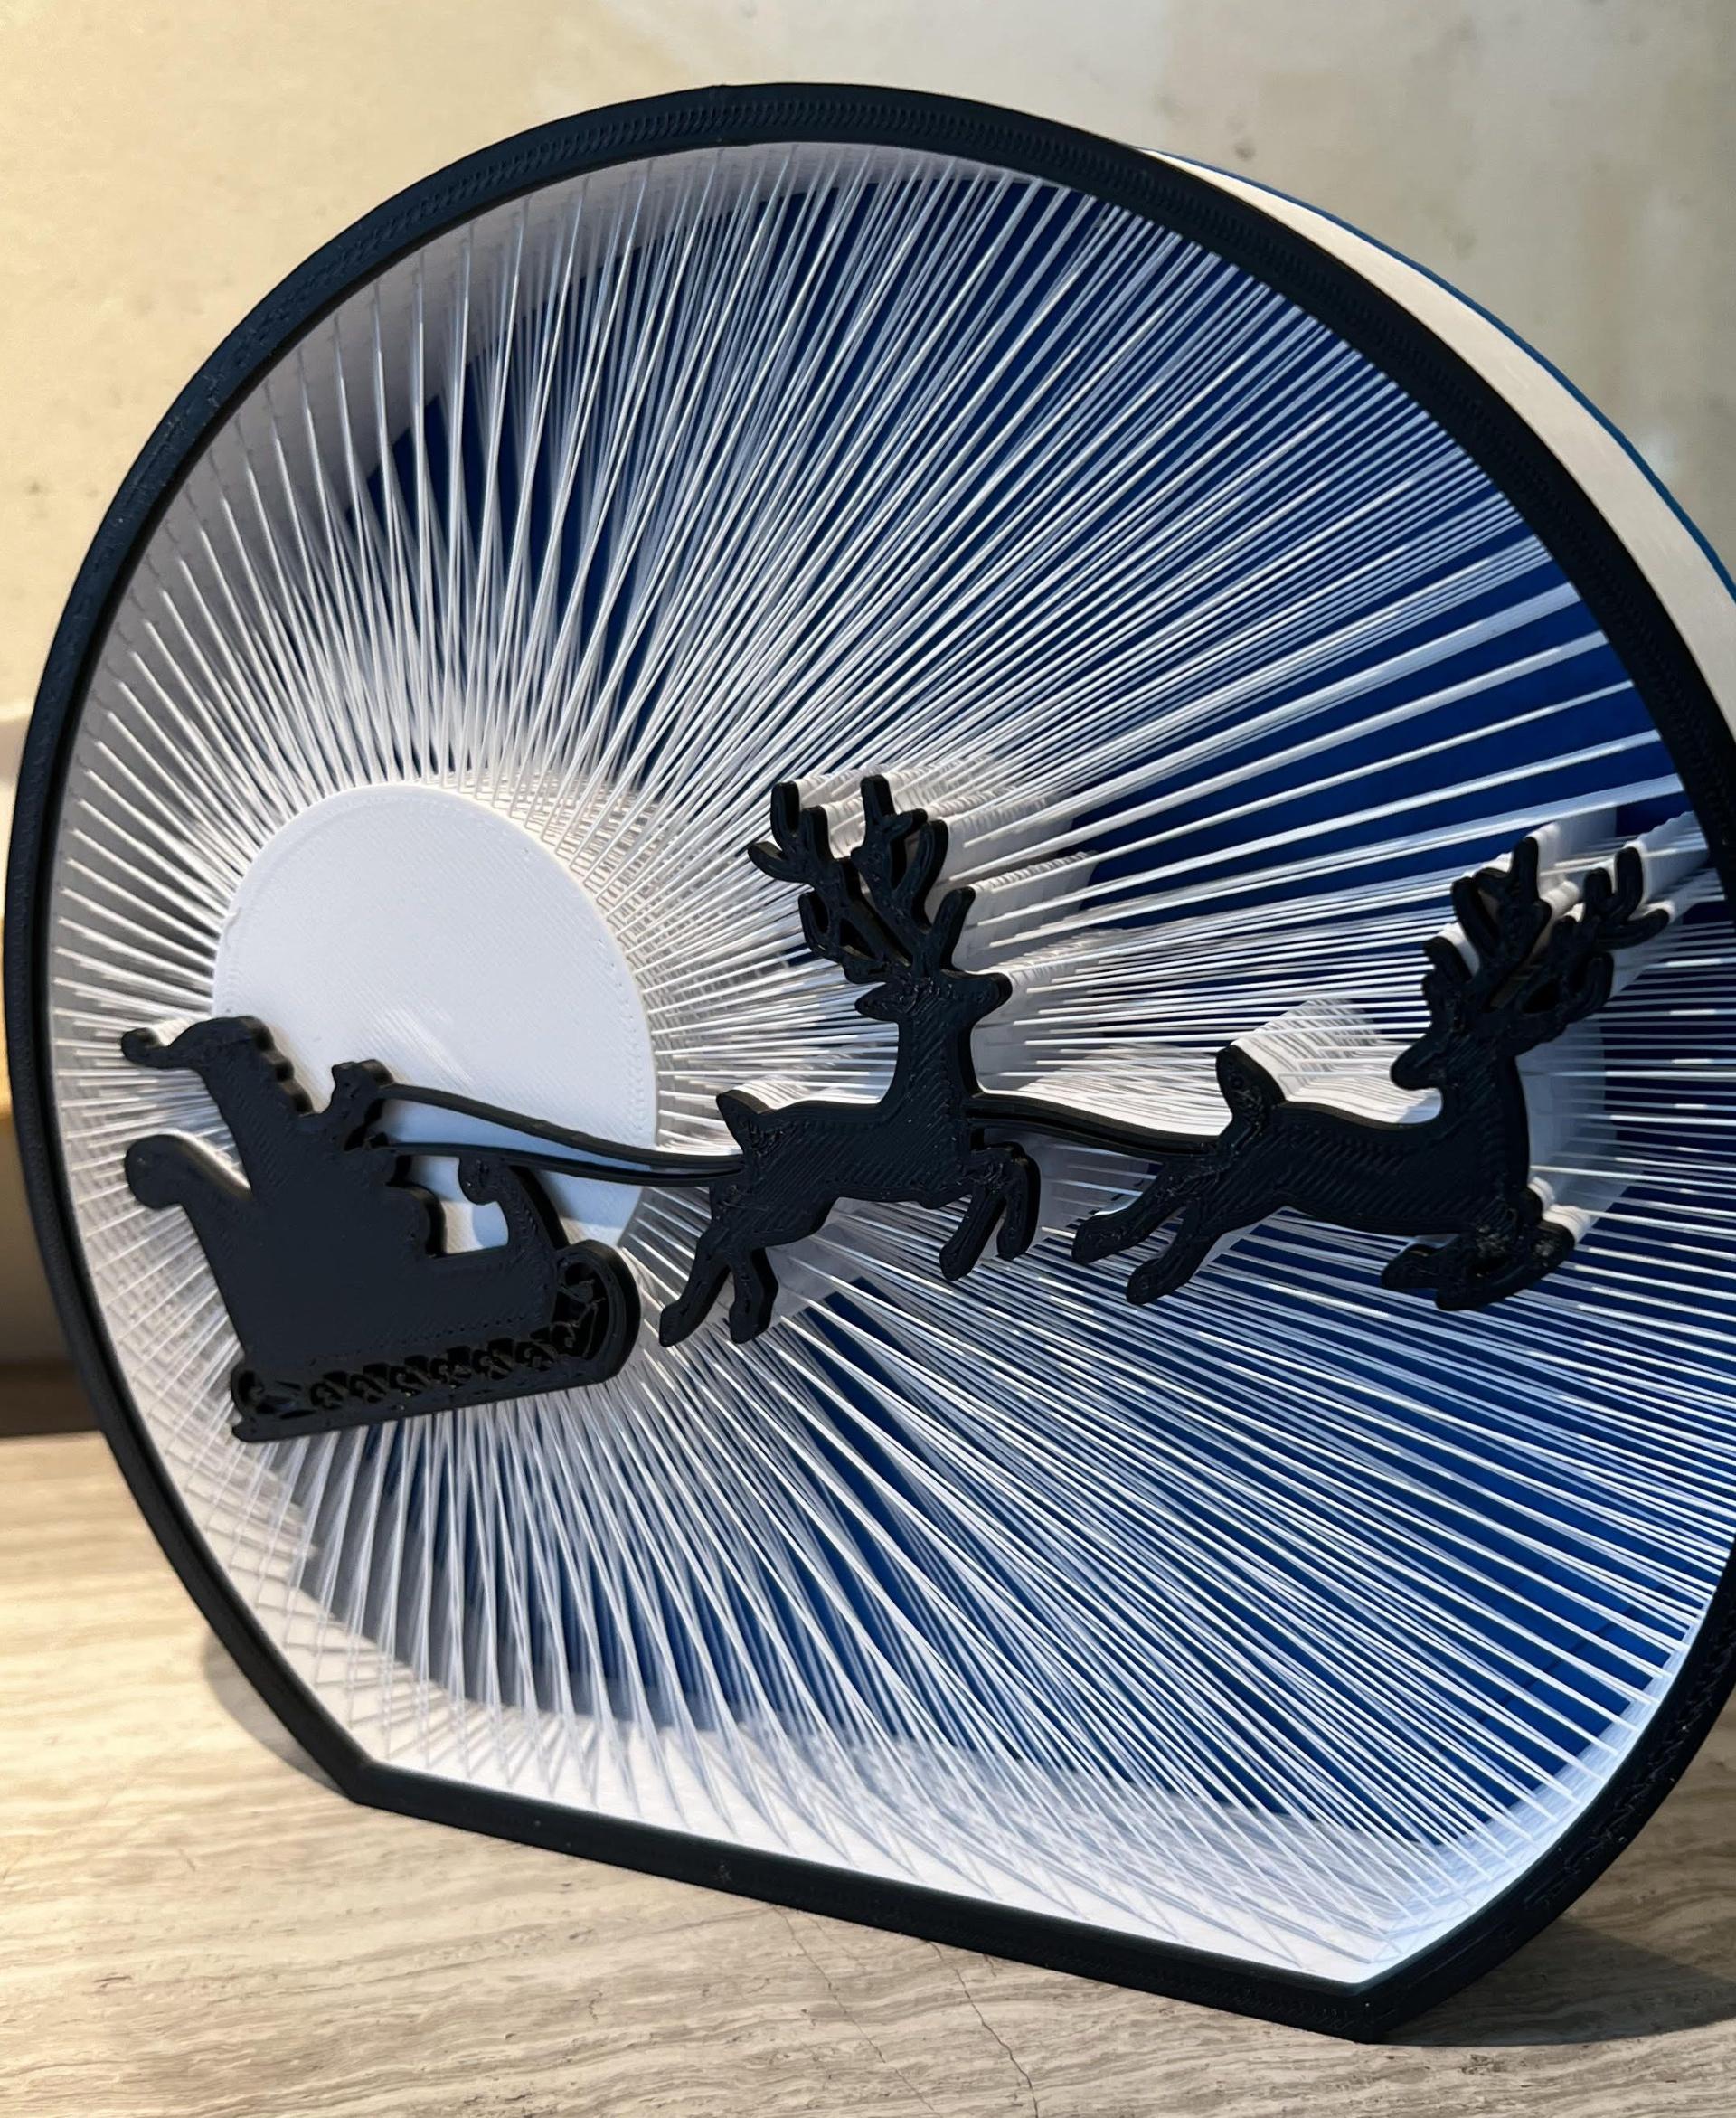 Moonlight Santa String Art - Wow!  I have no idea how this was designed, but it printed perfectly on my first try (with eSun ABS+).

Just amazing - 3d model